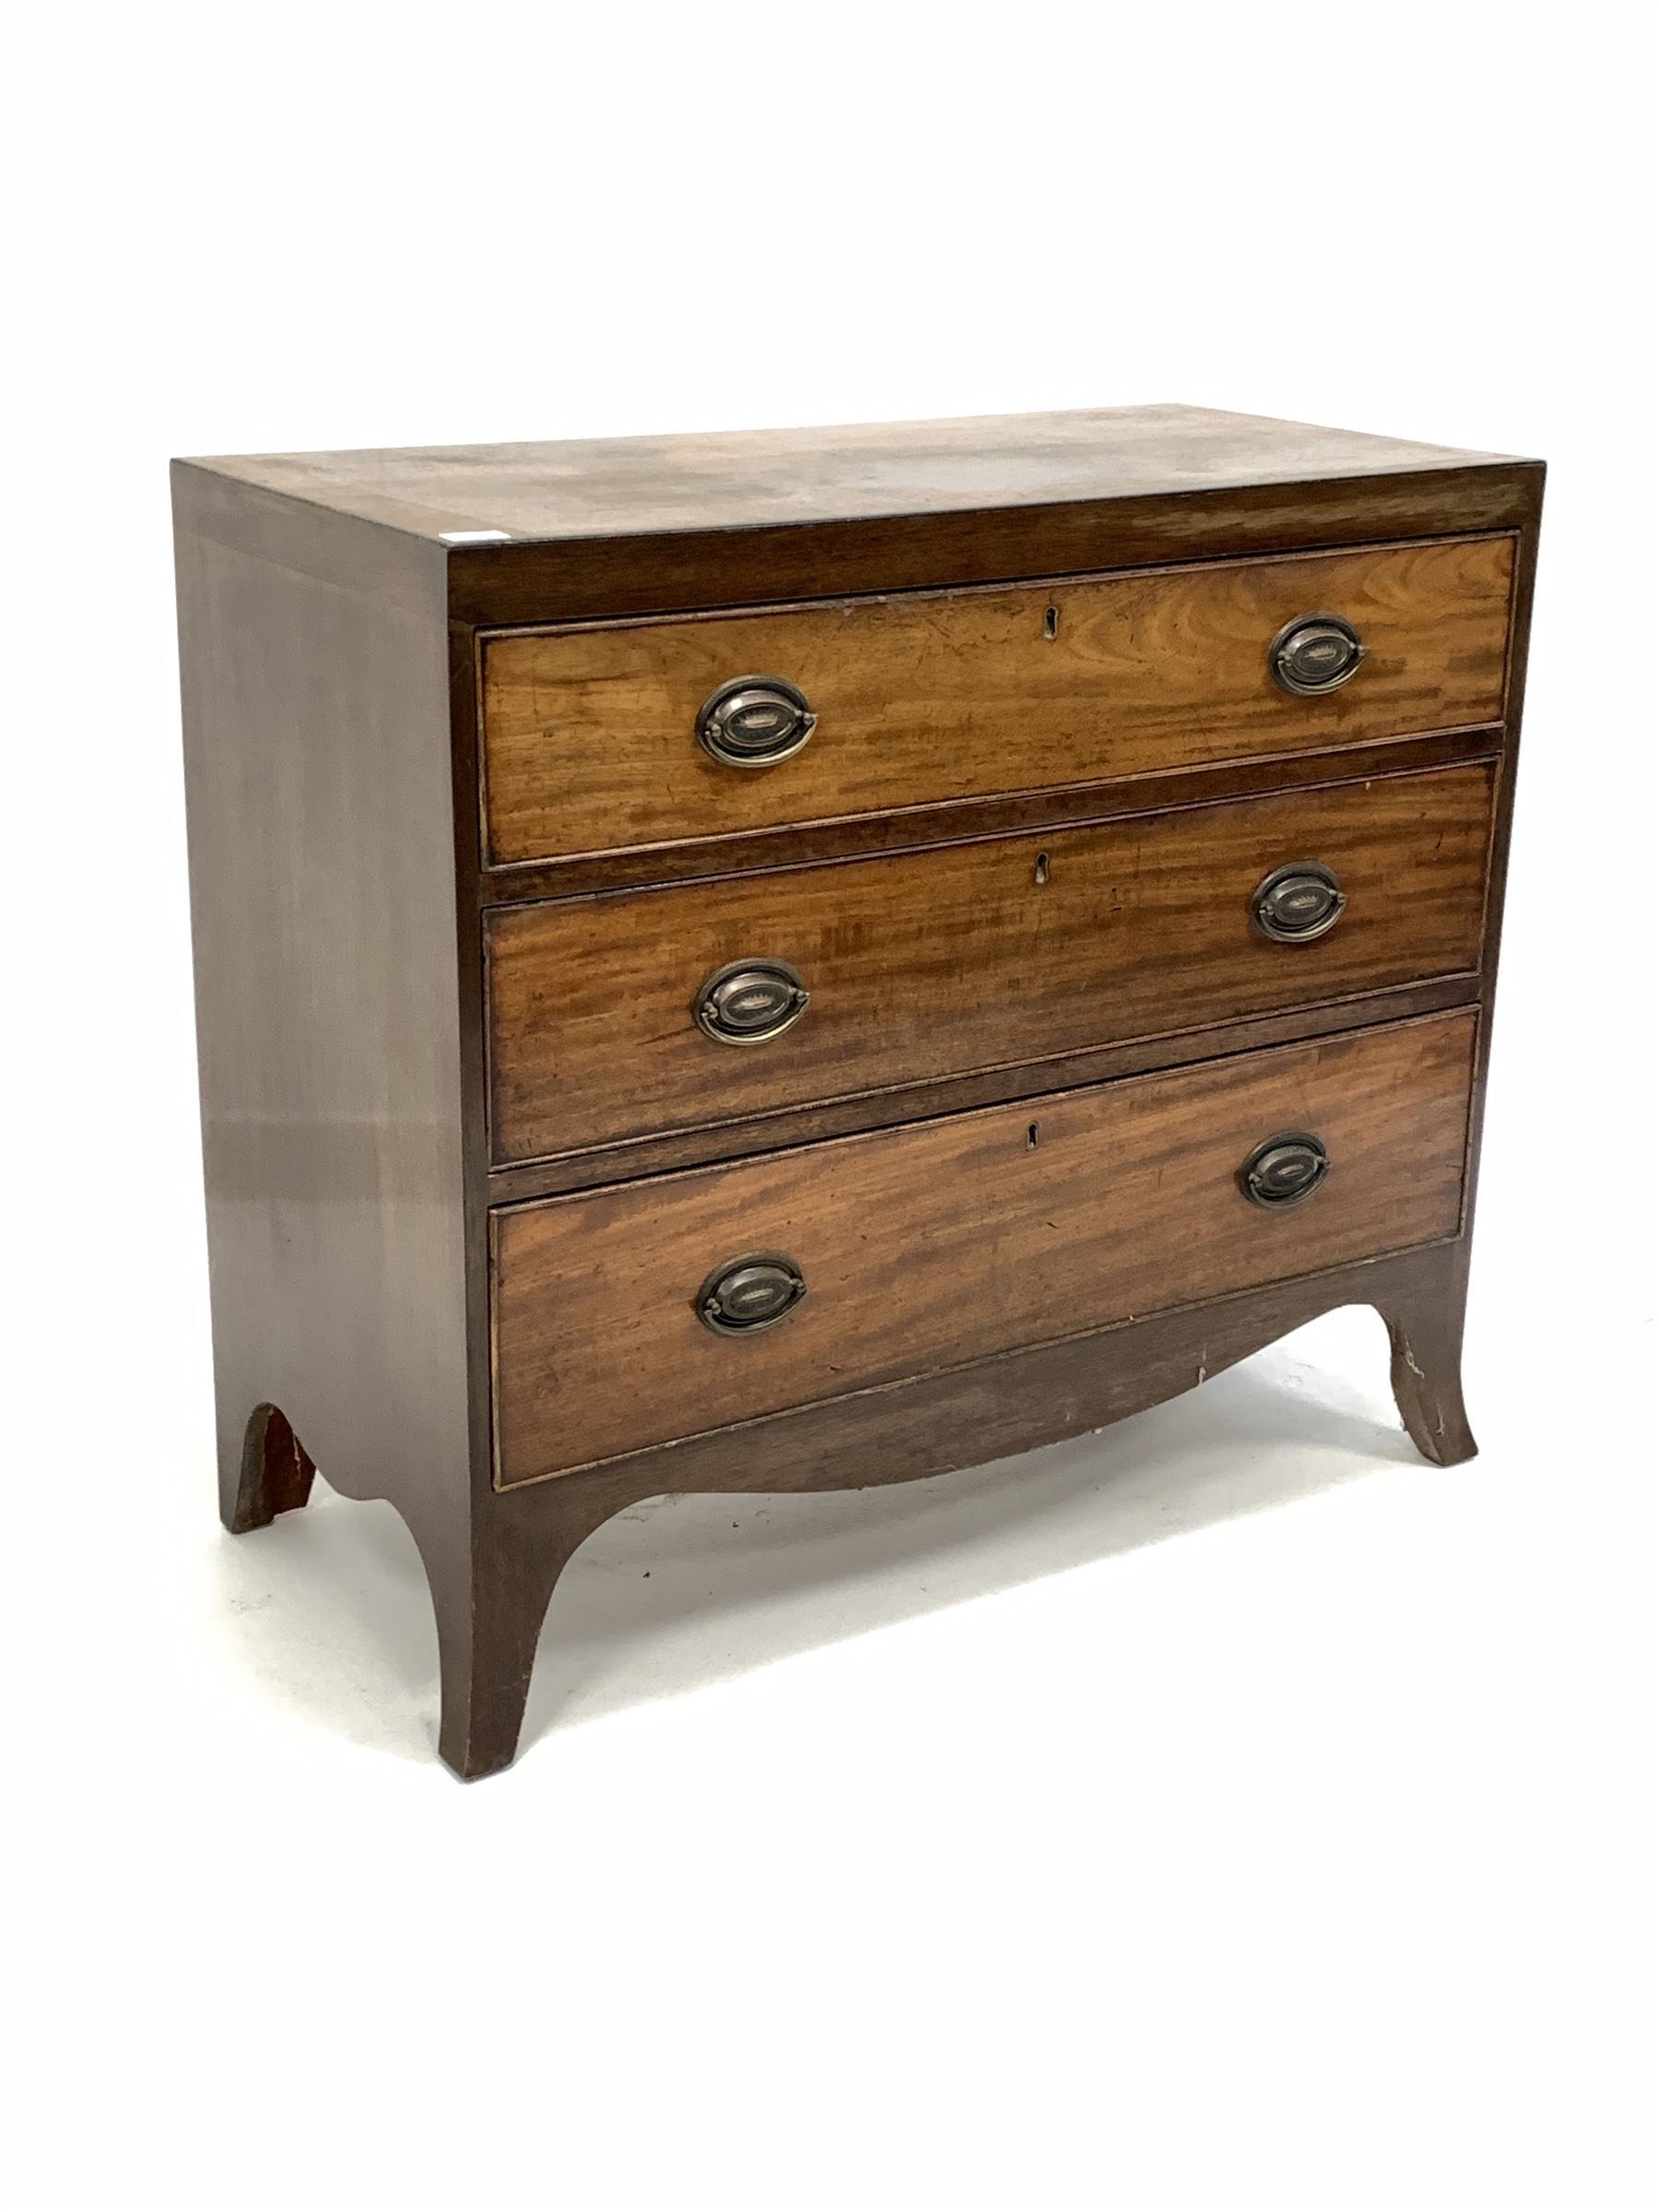 Small George III mahogany chest - Image 3 of 4